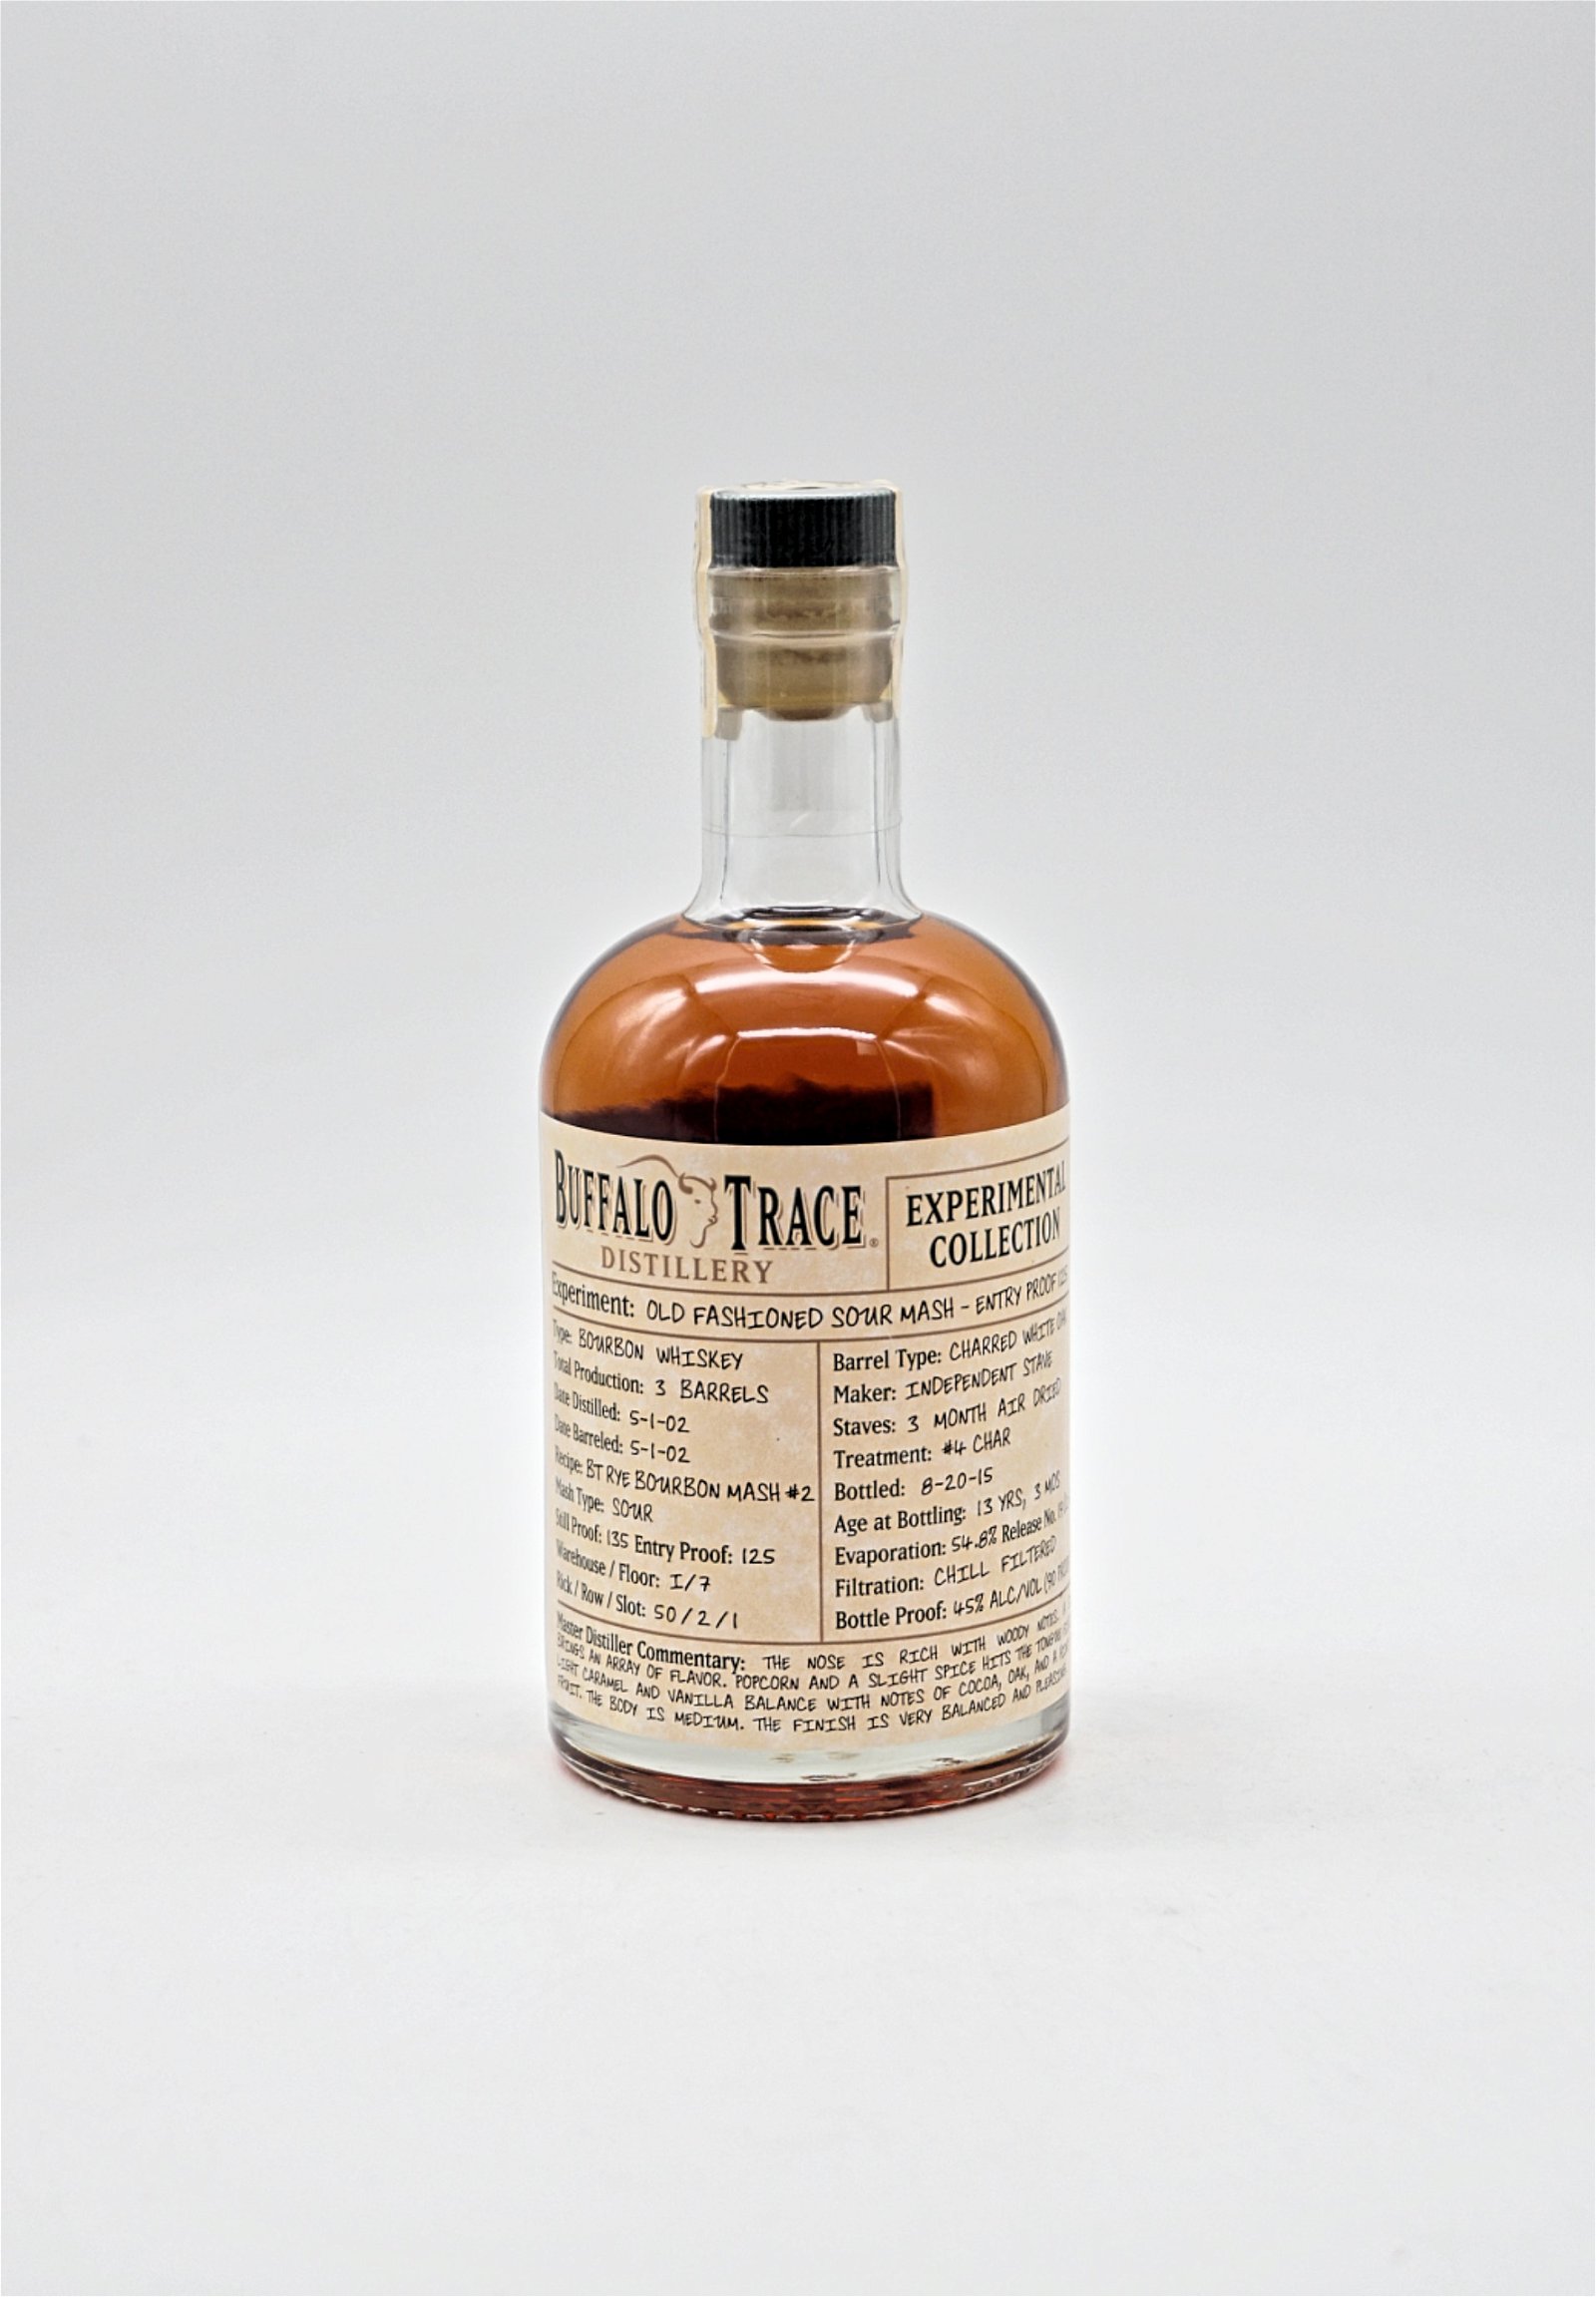 Buffalo Trace Distillery Experimental Collection 2002/2015 Entry Proof 125 Bourbon Whiske